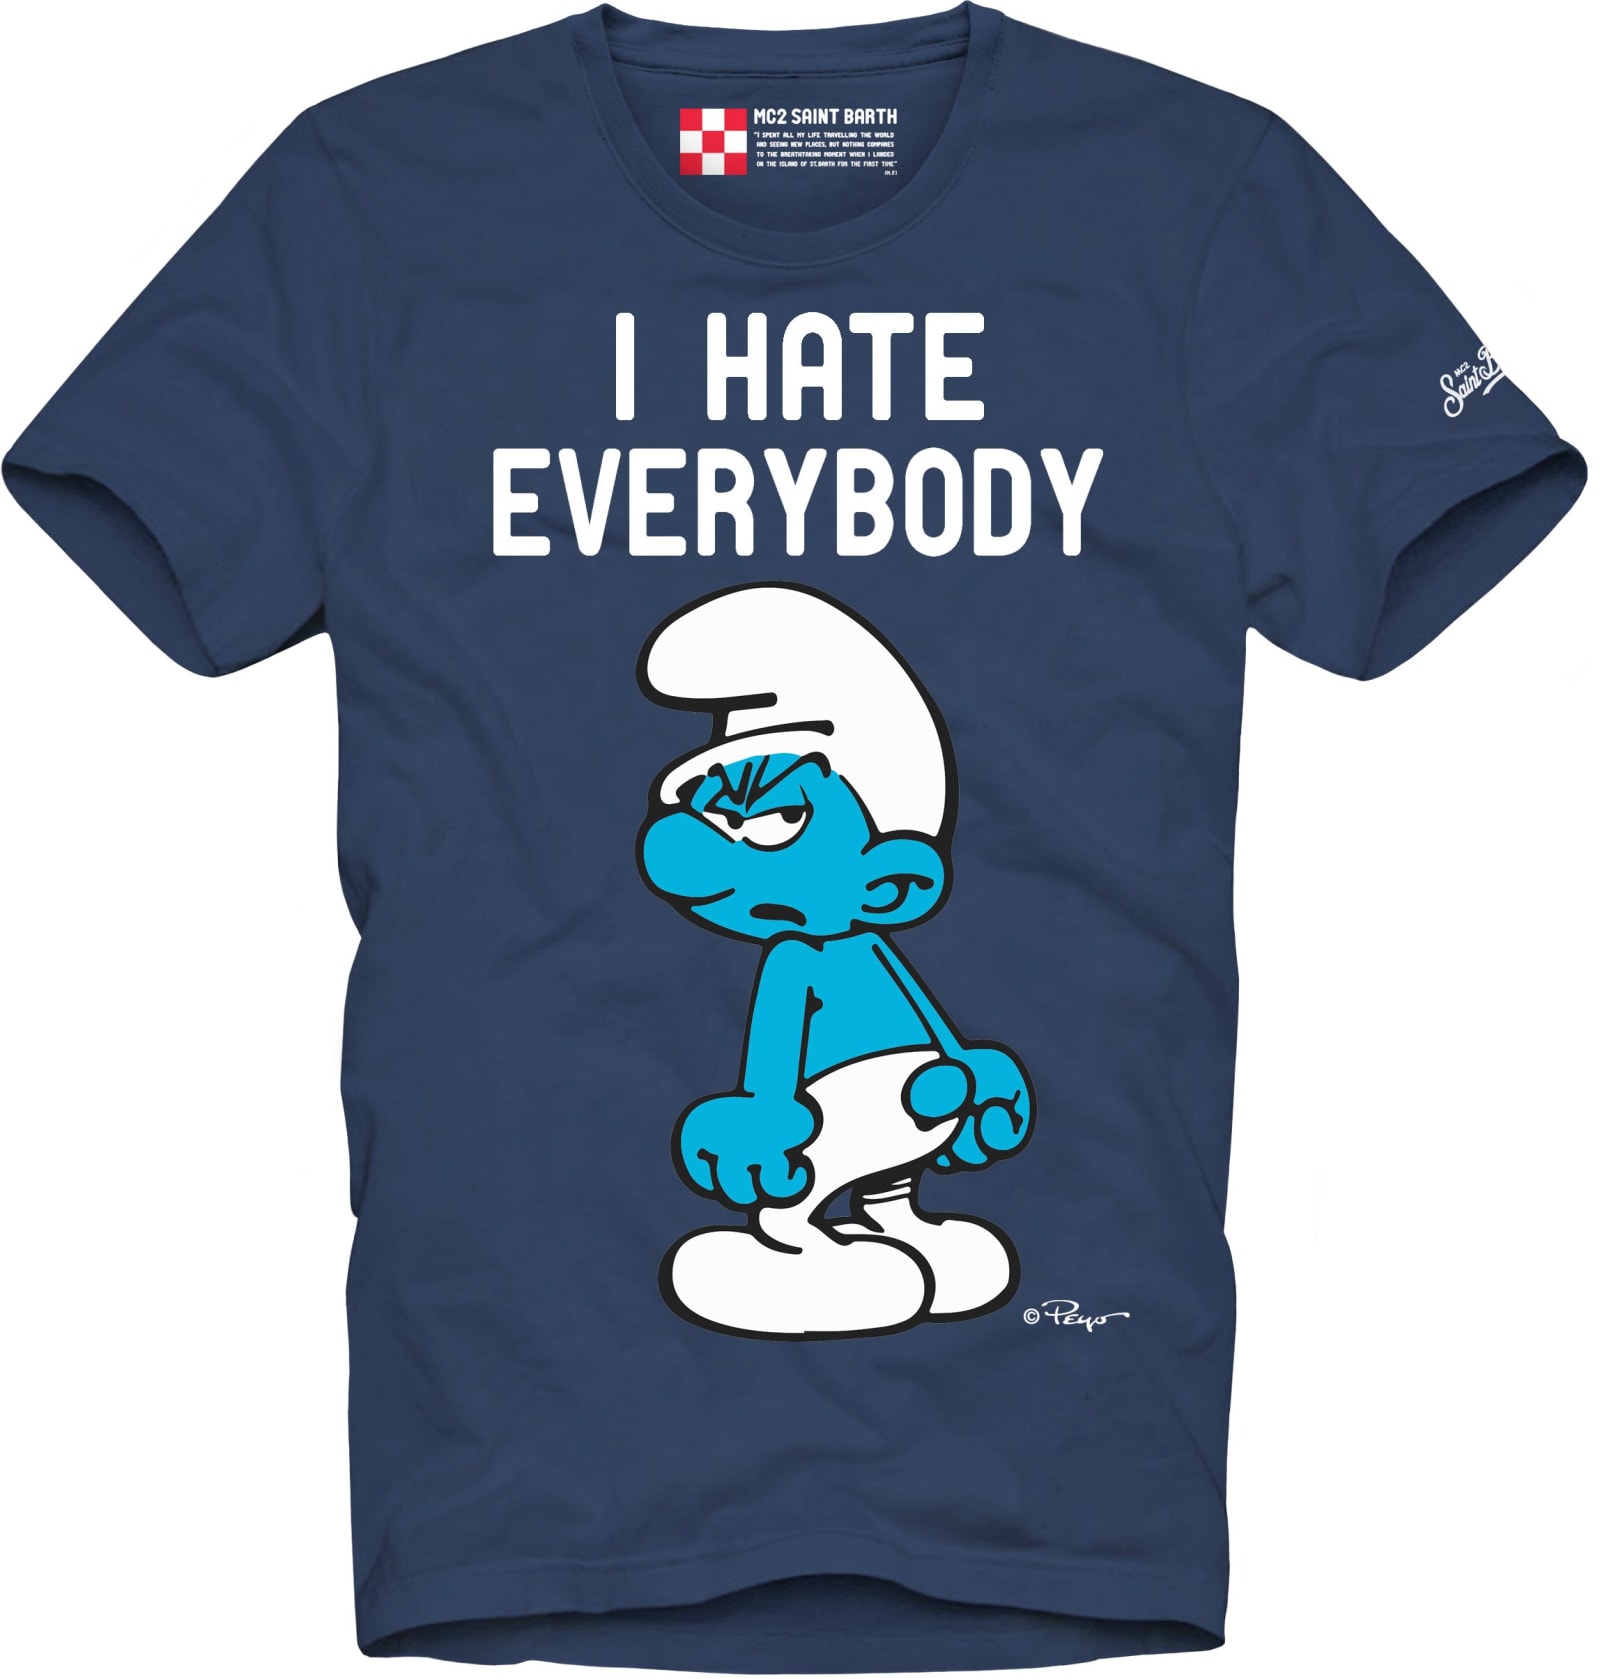 MC2 Saint Barth I Hate Everybody Printed Blue Navy T-shirt - The Smurfs Special Edition ®